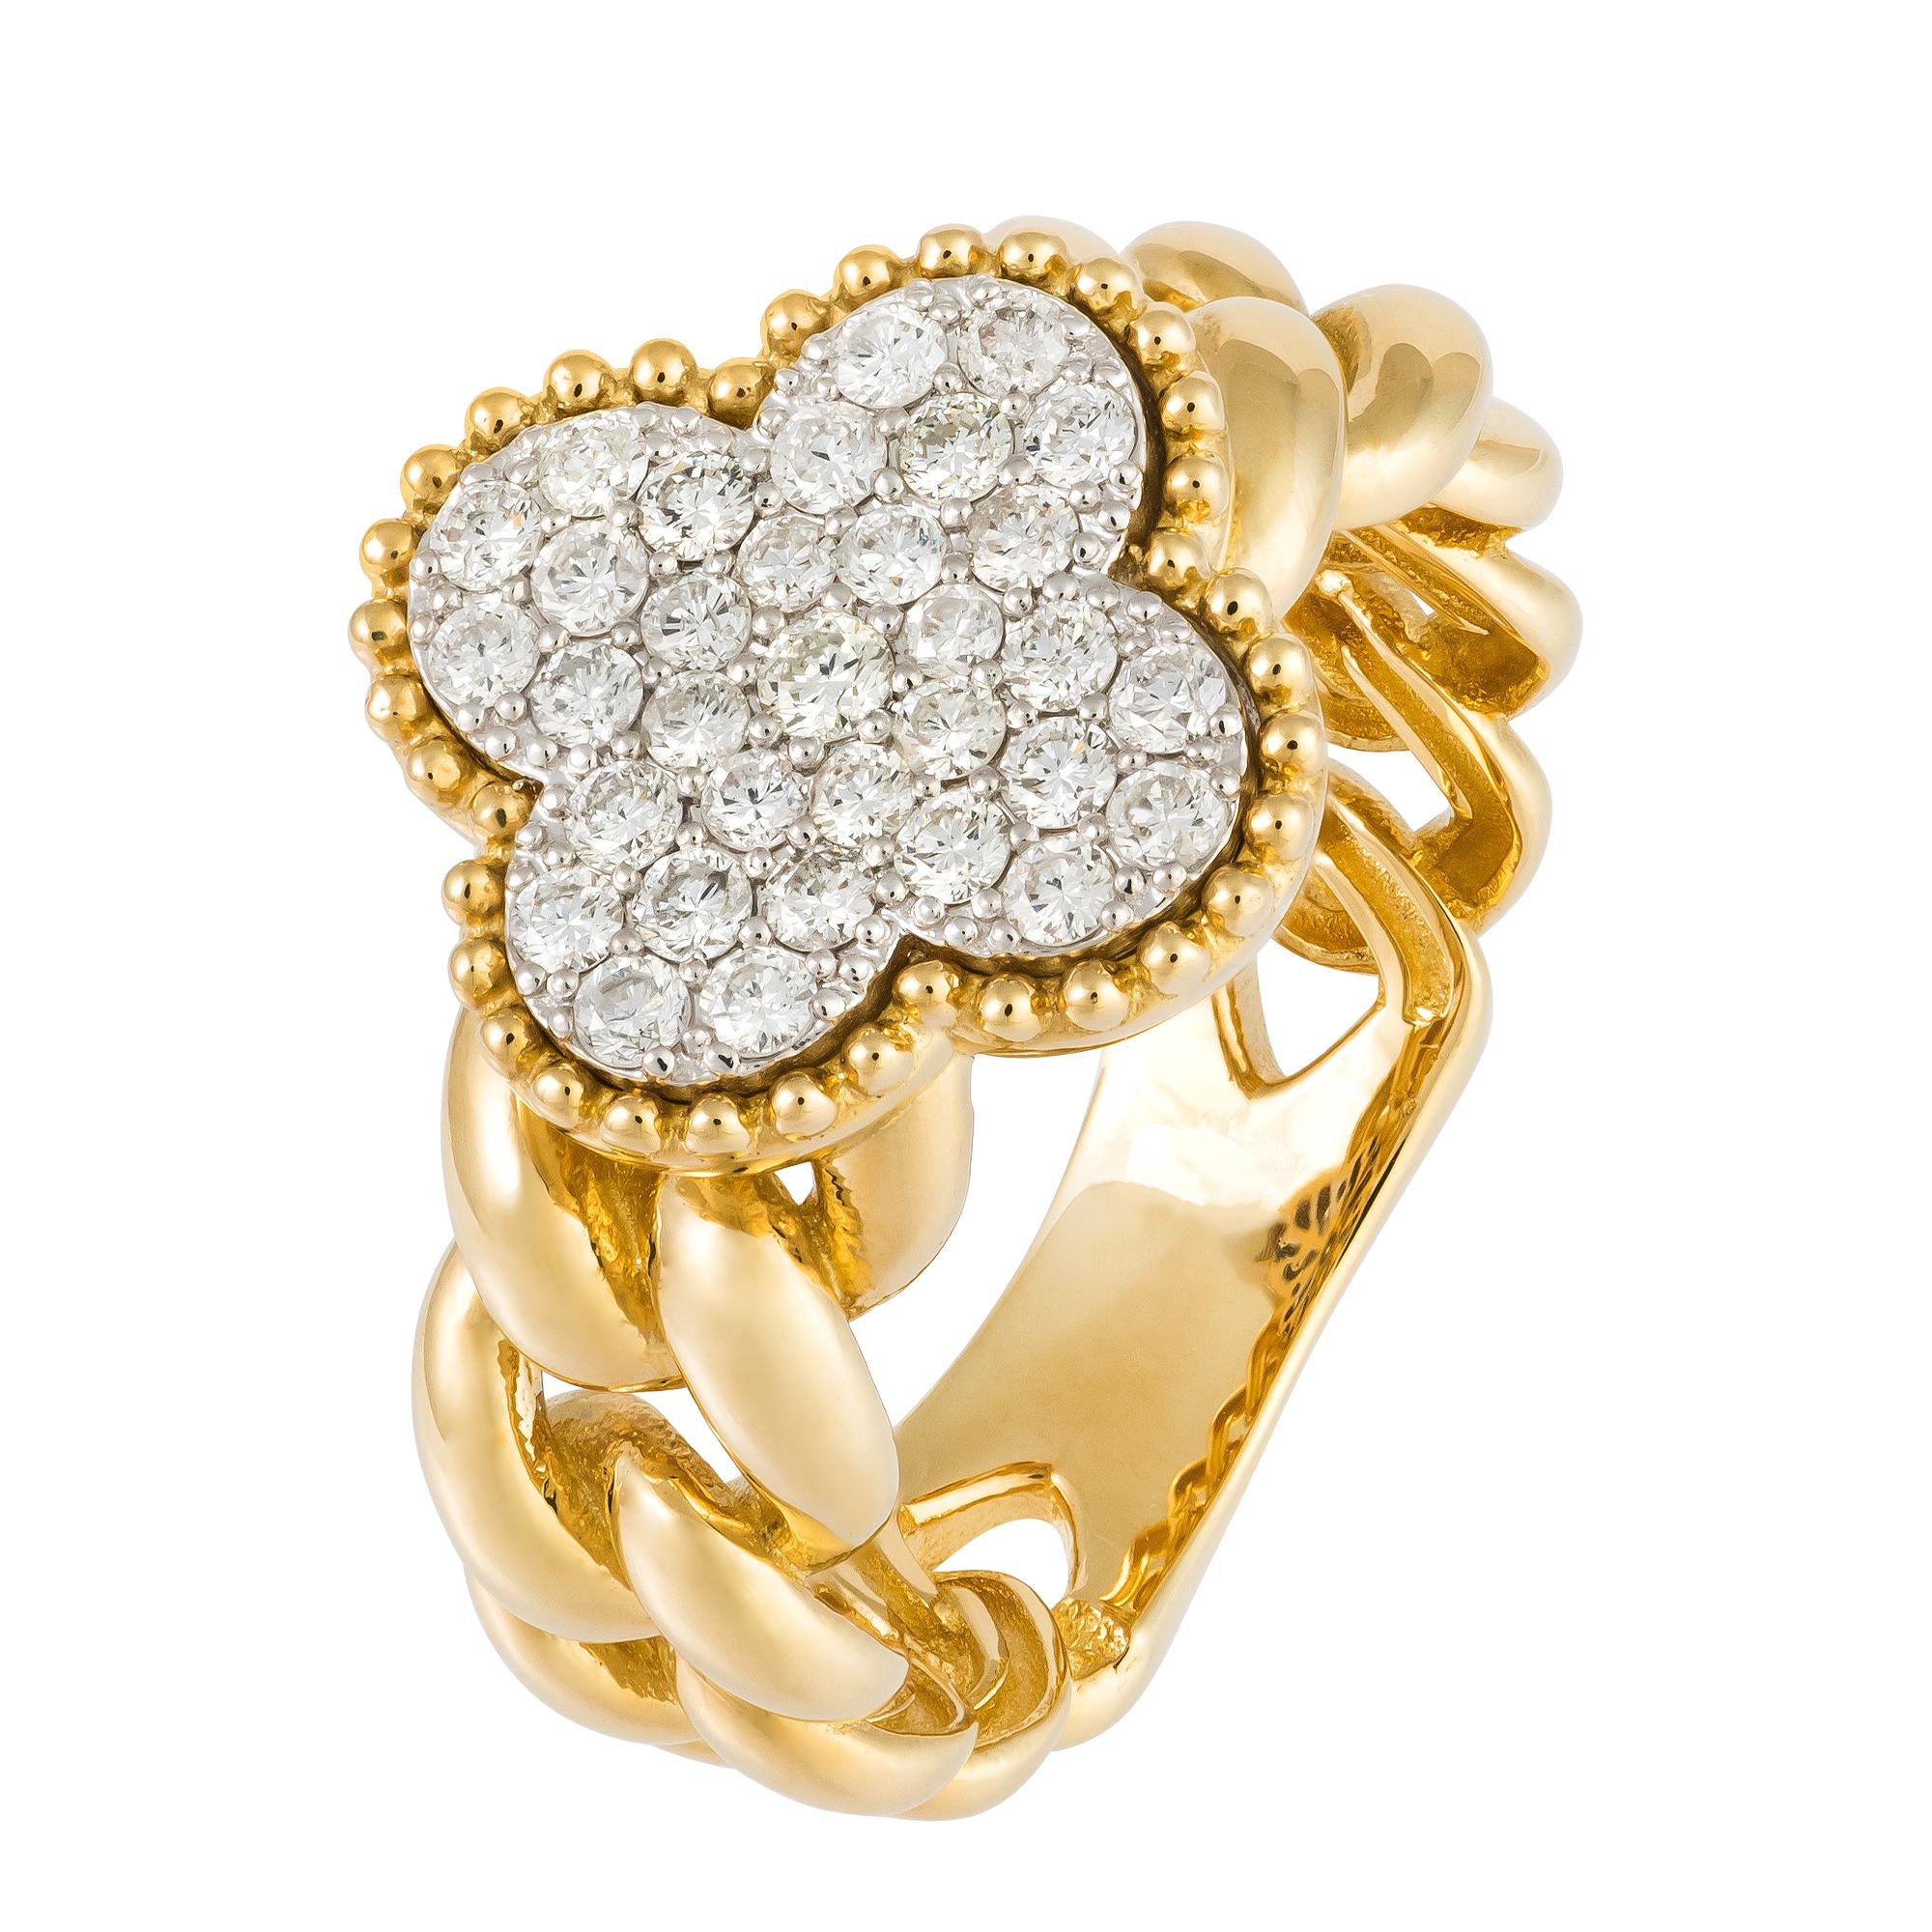 For Sale:  Stunning Yellow 18K Gold White Diamond Ring For Her 4